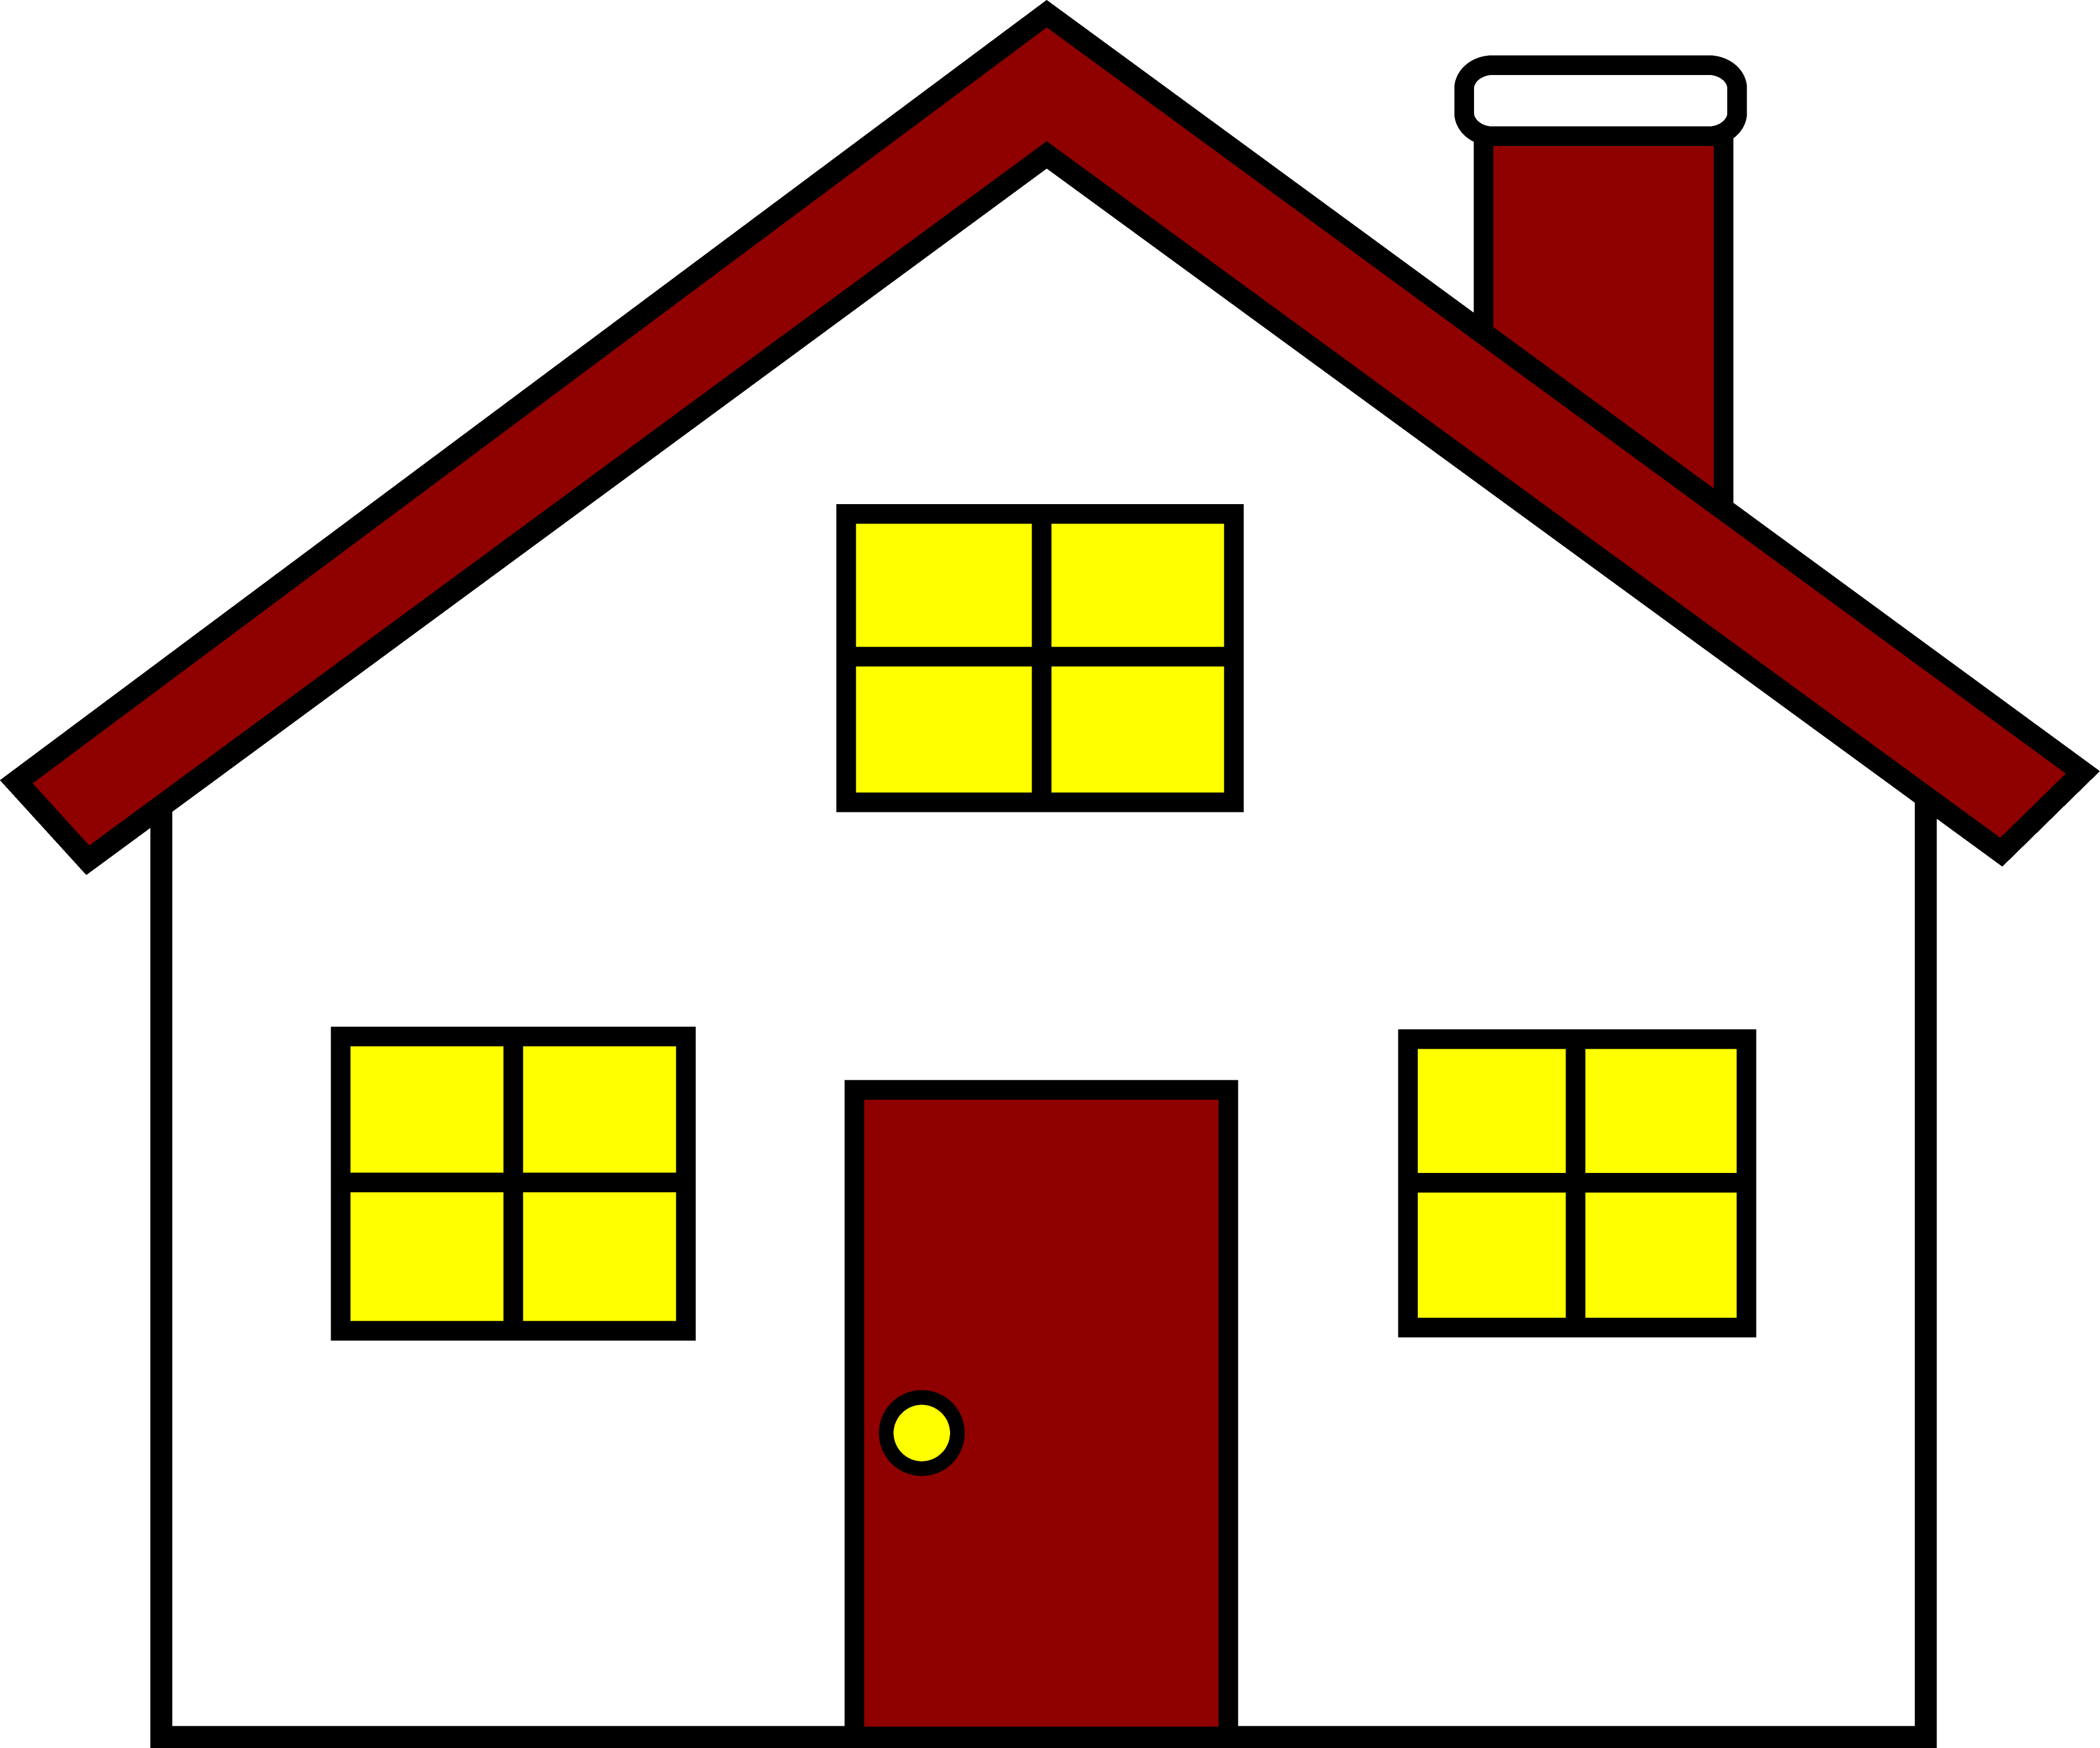 Funky Houses Clipart House Di